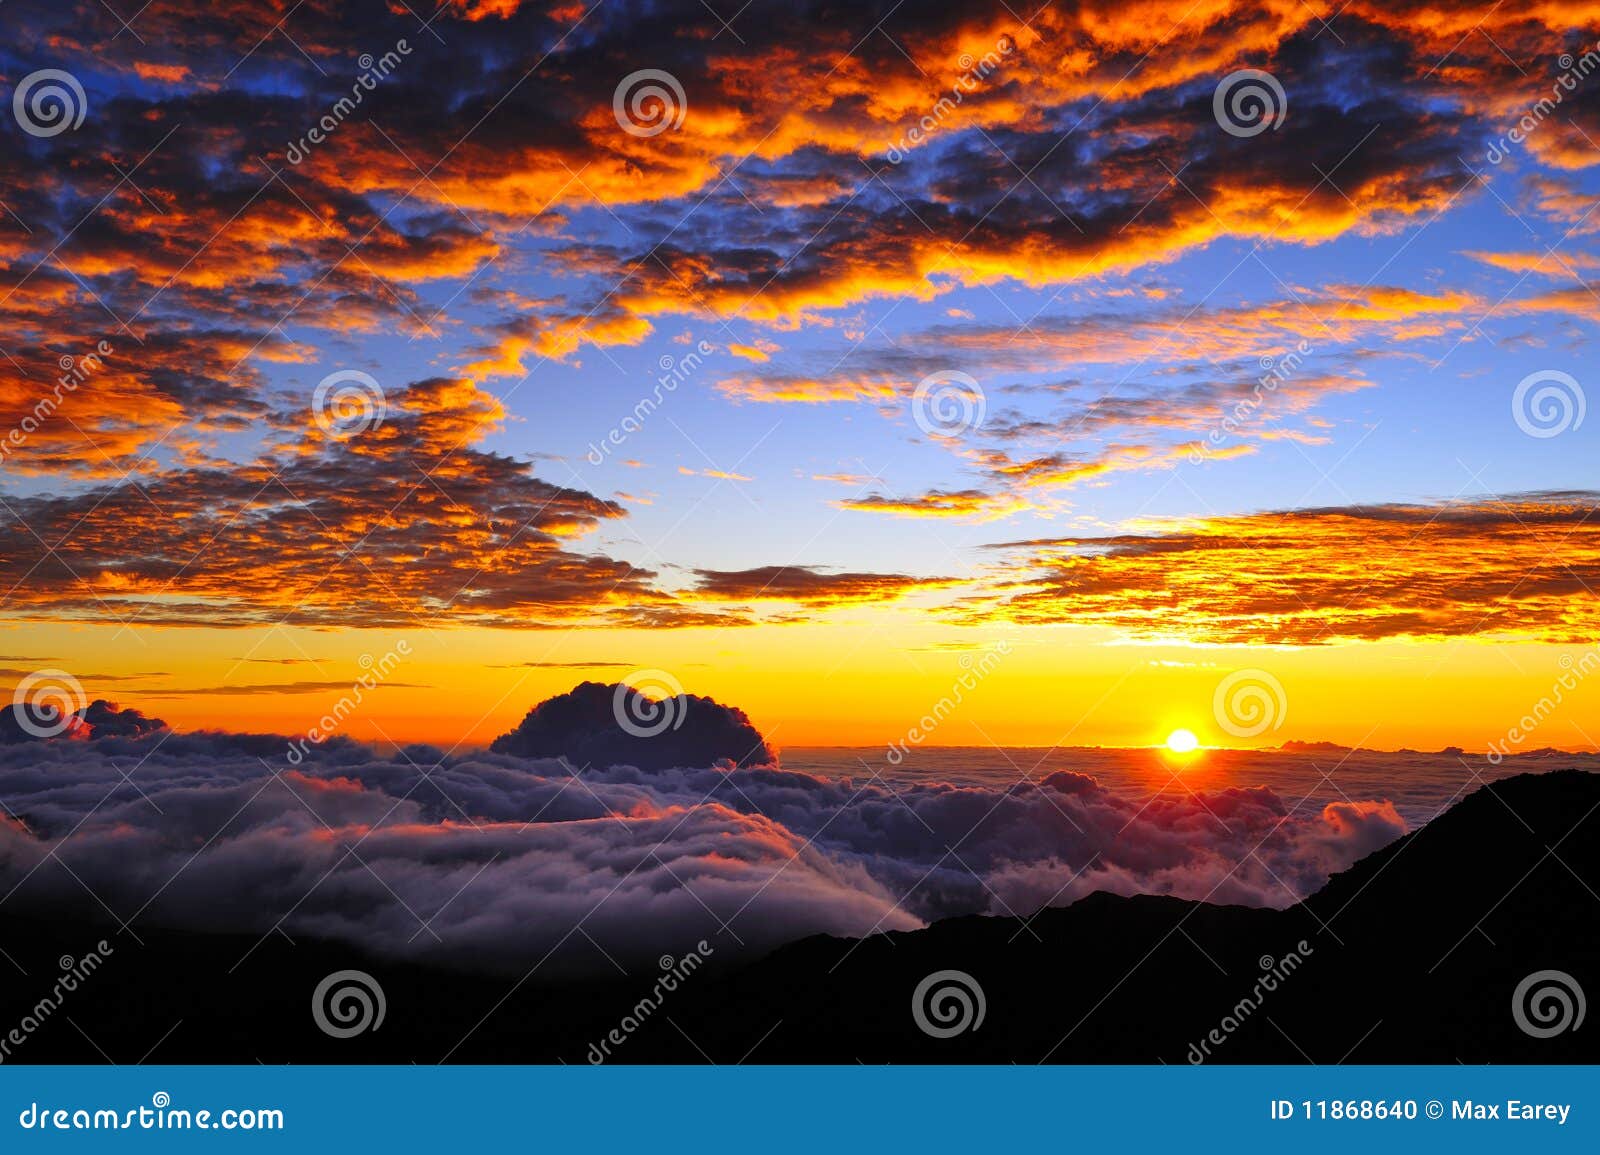 sunset and cloudscape